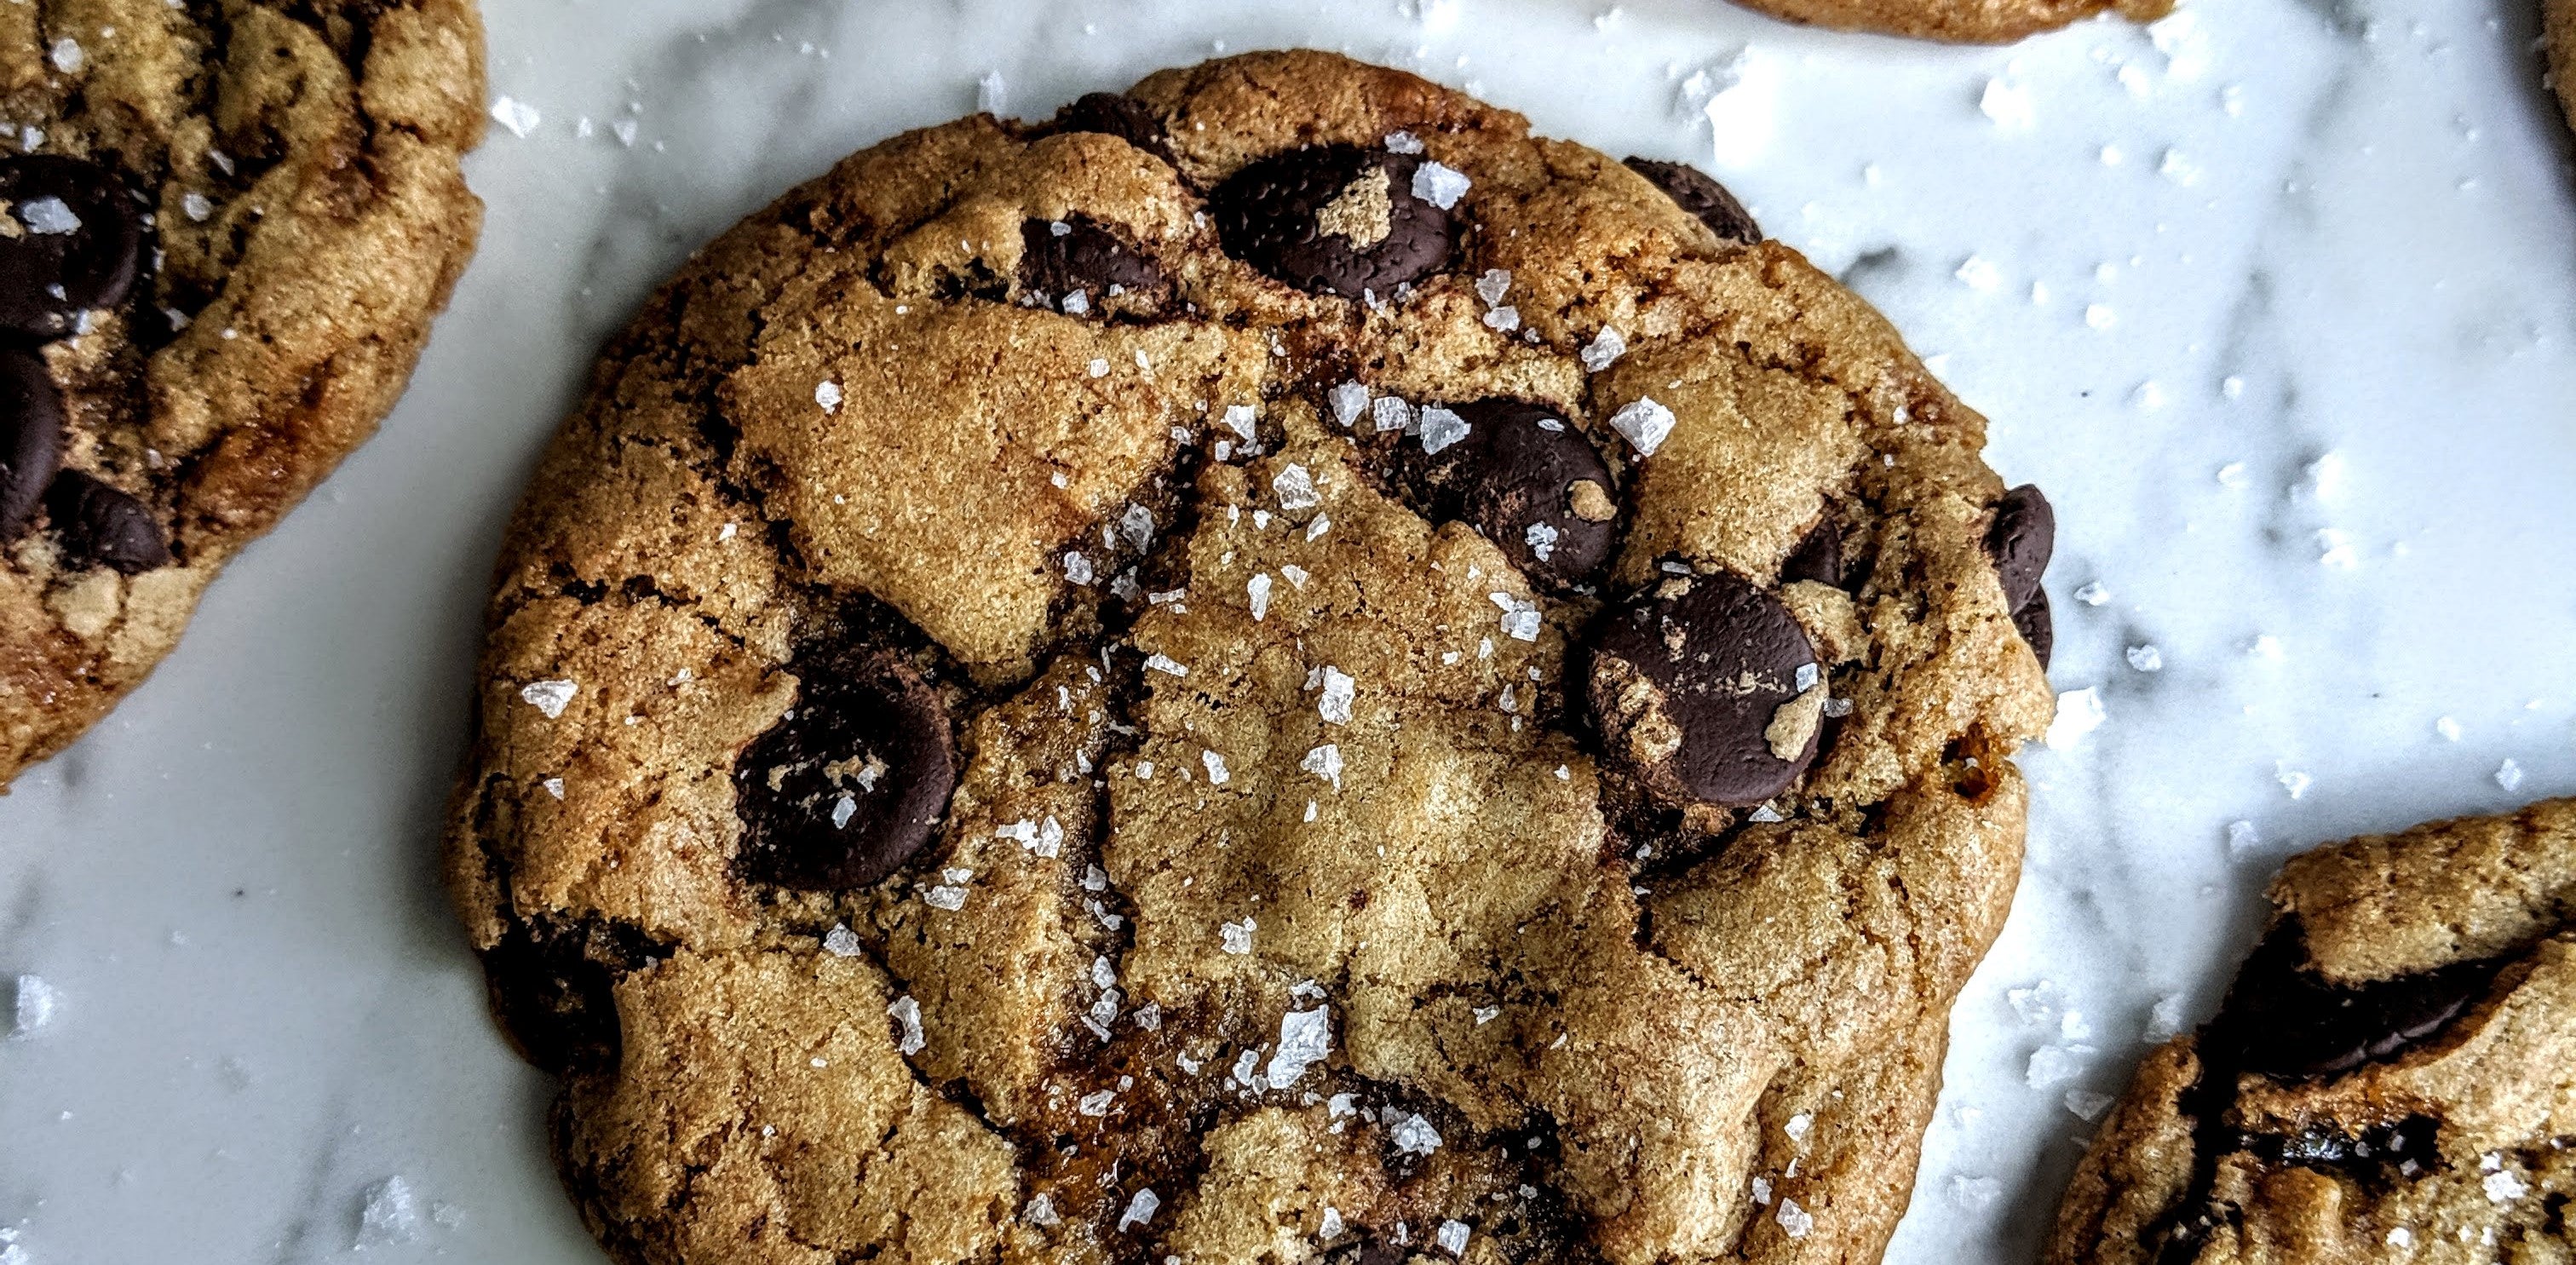 Brown-Buttered-Salted-Caramel-Chocolate-Chip-Cookies-4.jpg